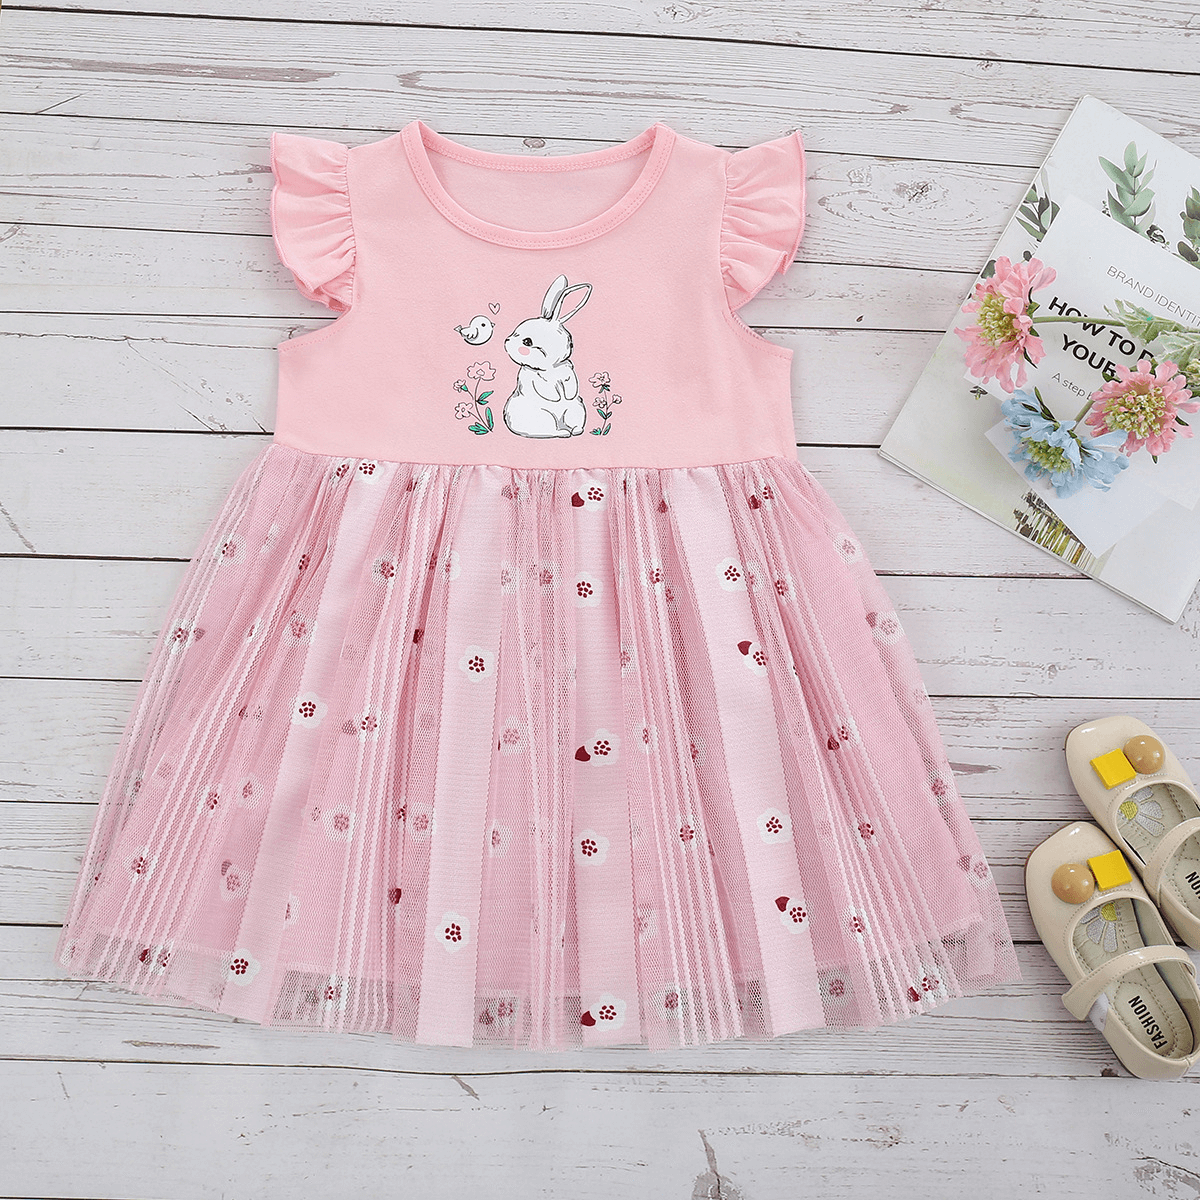 Cute Bunny Print Easter Dress,2T to 6T.